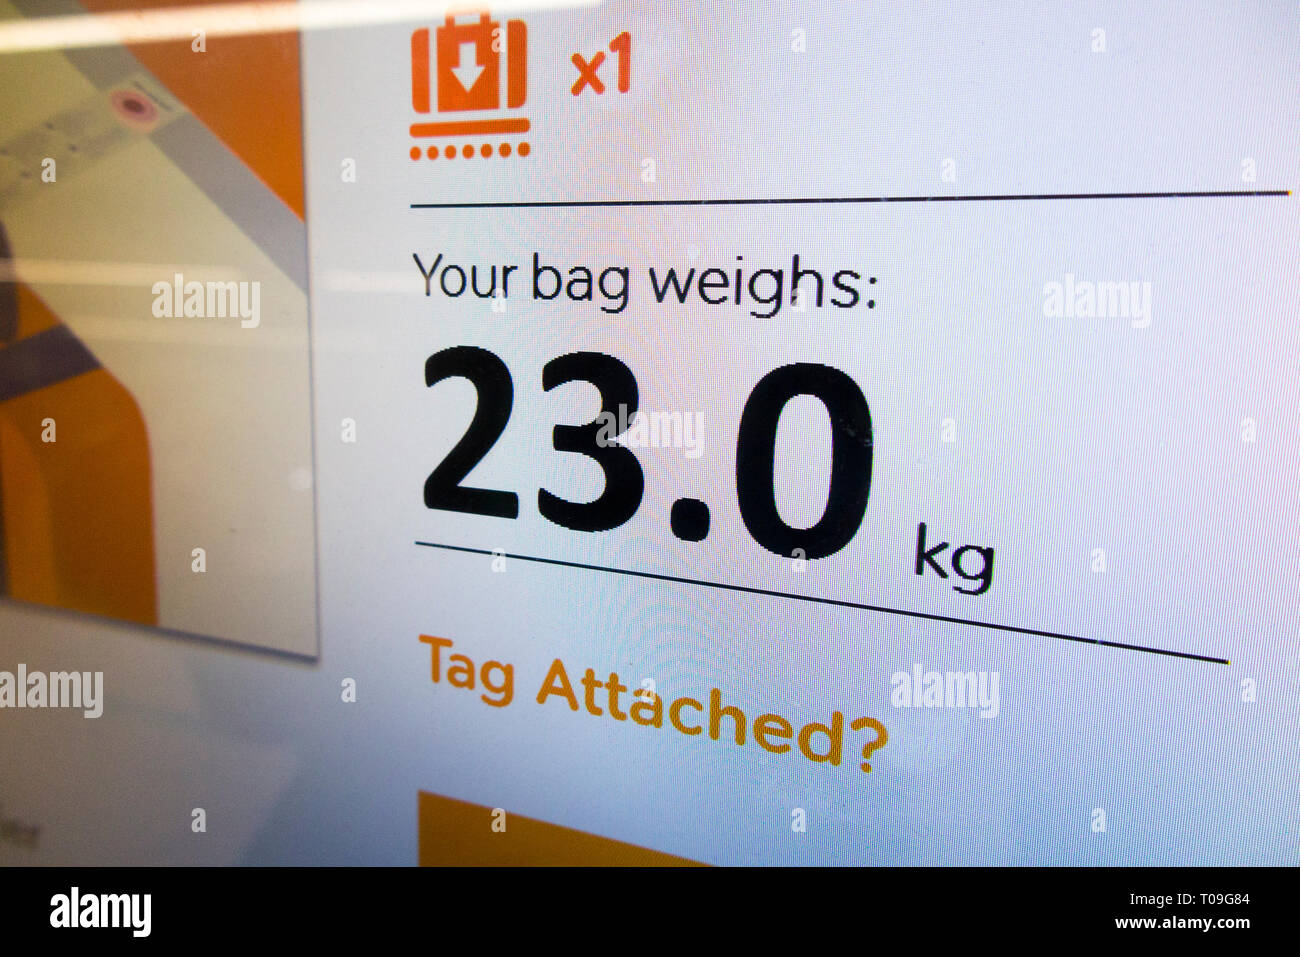 Airport check in weighing scale showing 23 kg kilograms / scales display to weigh passenger bags baggage / luggage weight checked into the plane hold. (104) Stock Photo